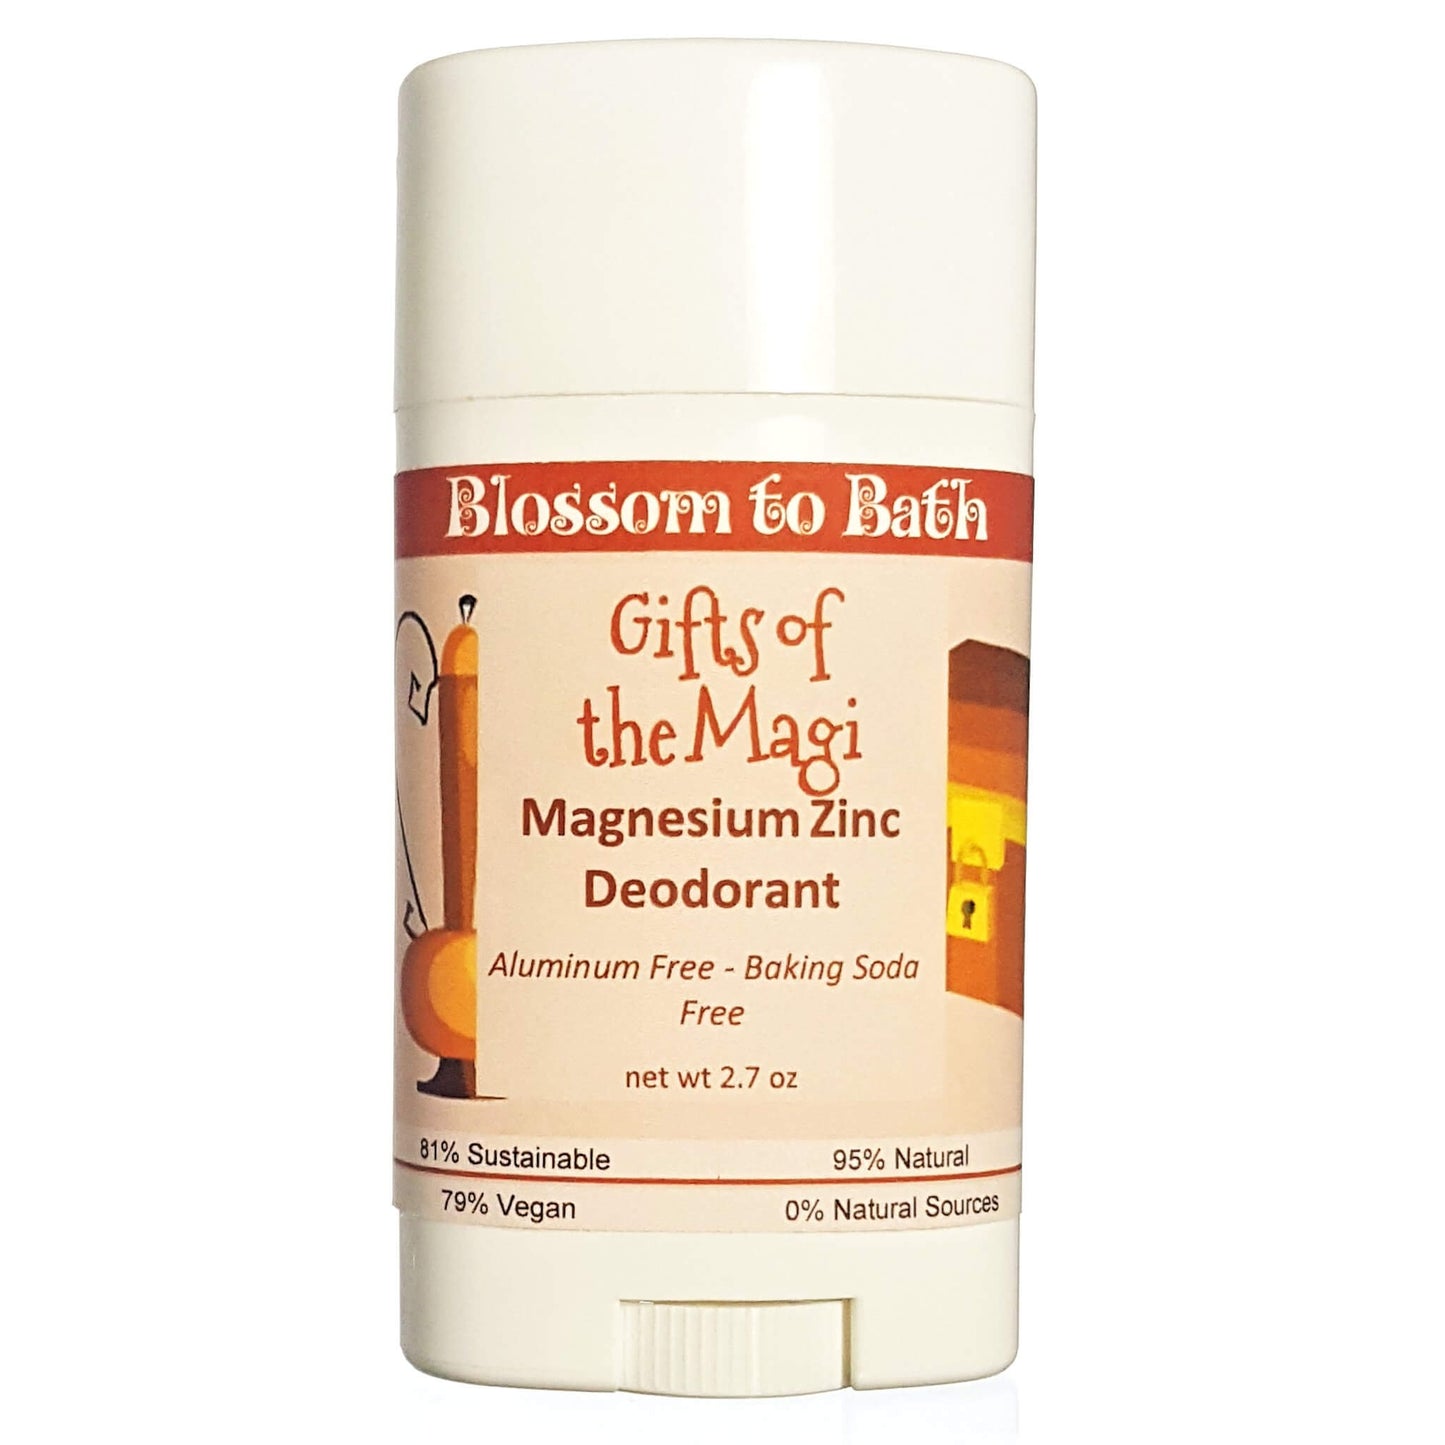 Buy Blossom to Bath Gifts of the Magi Magnesium Zinc Deodorant from Flowersong Soap Studio.  Long lasting protection made from organic botanicals and butters, made without baking soda, tested in the Arizona heat  Celebrate the soulful side of the holiday spirit with warm spices and incense.